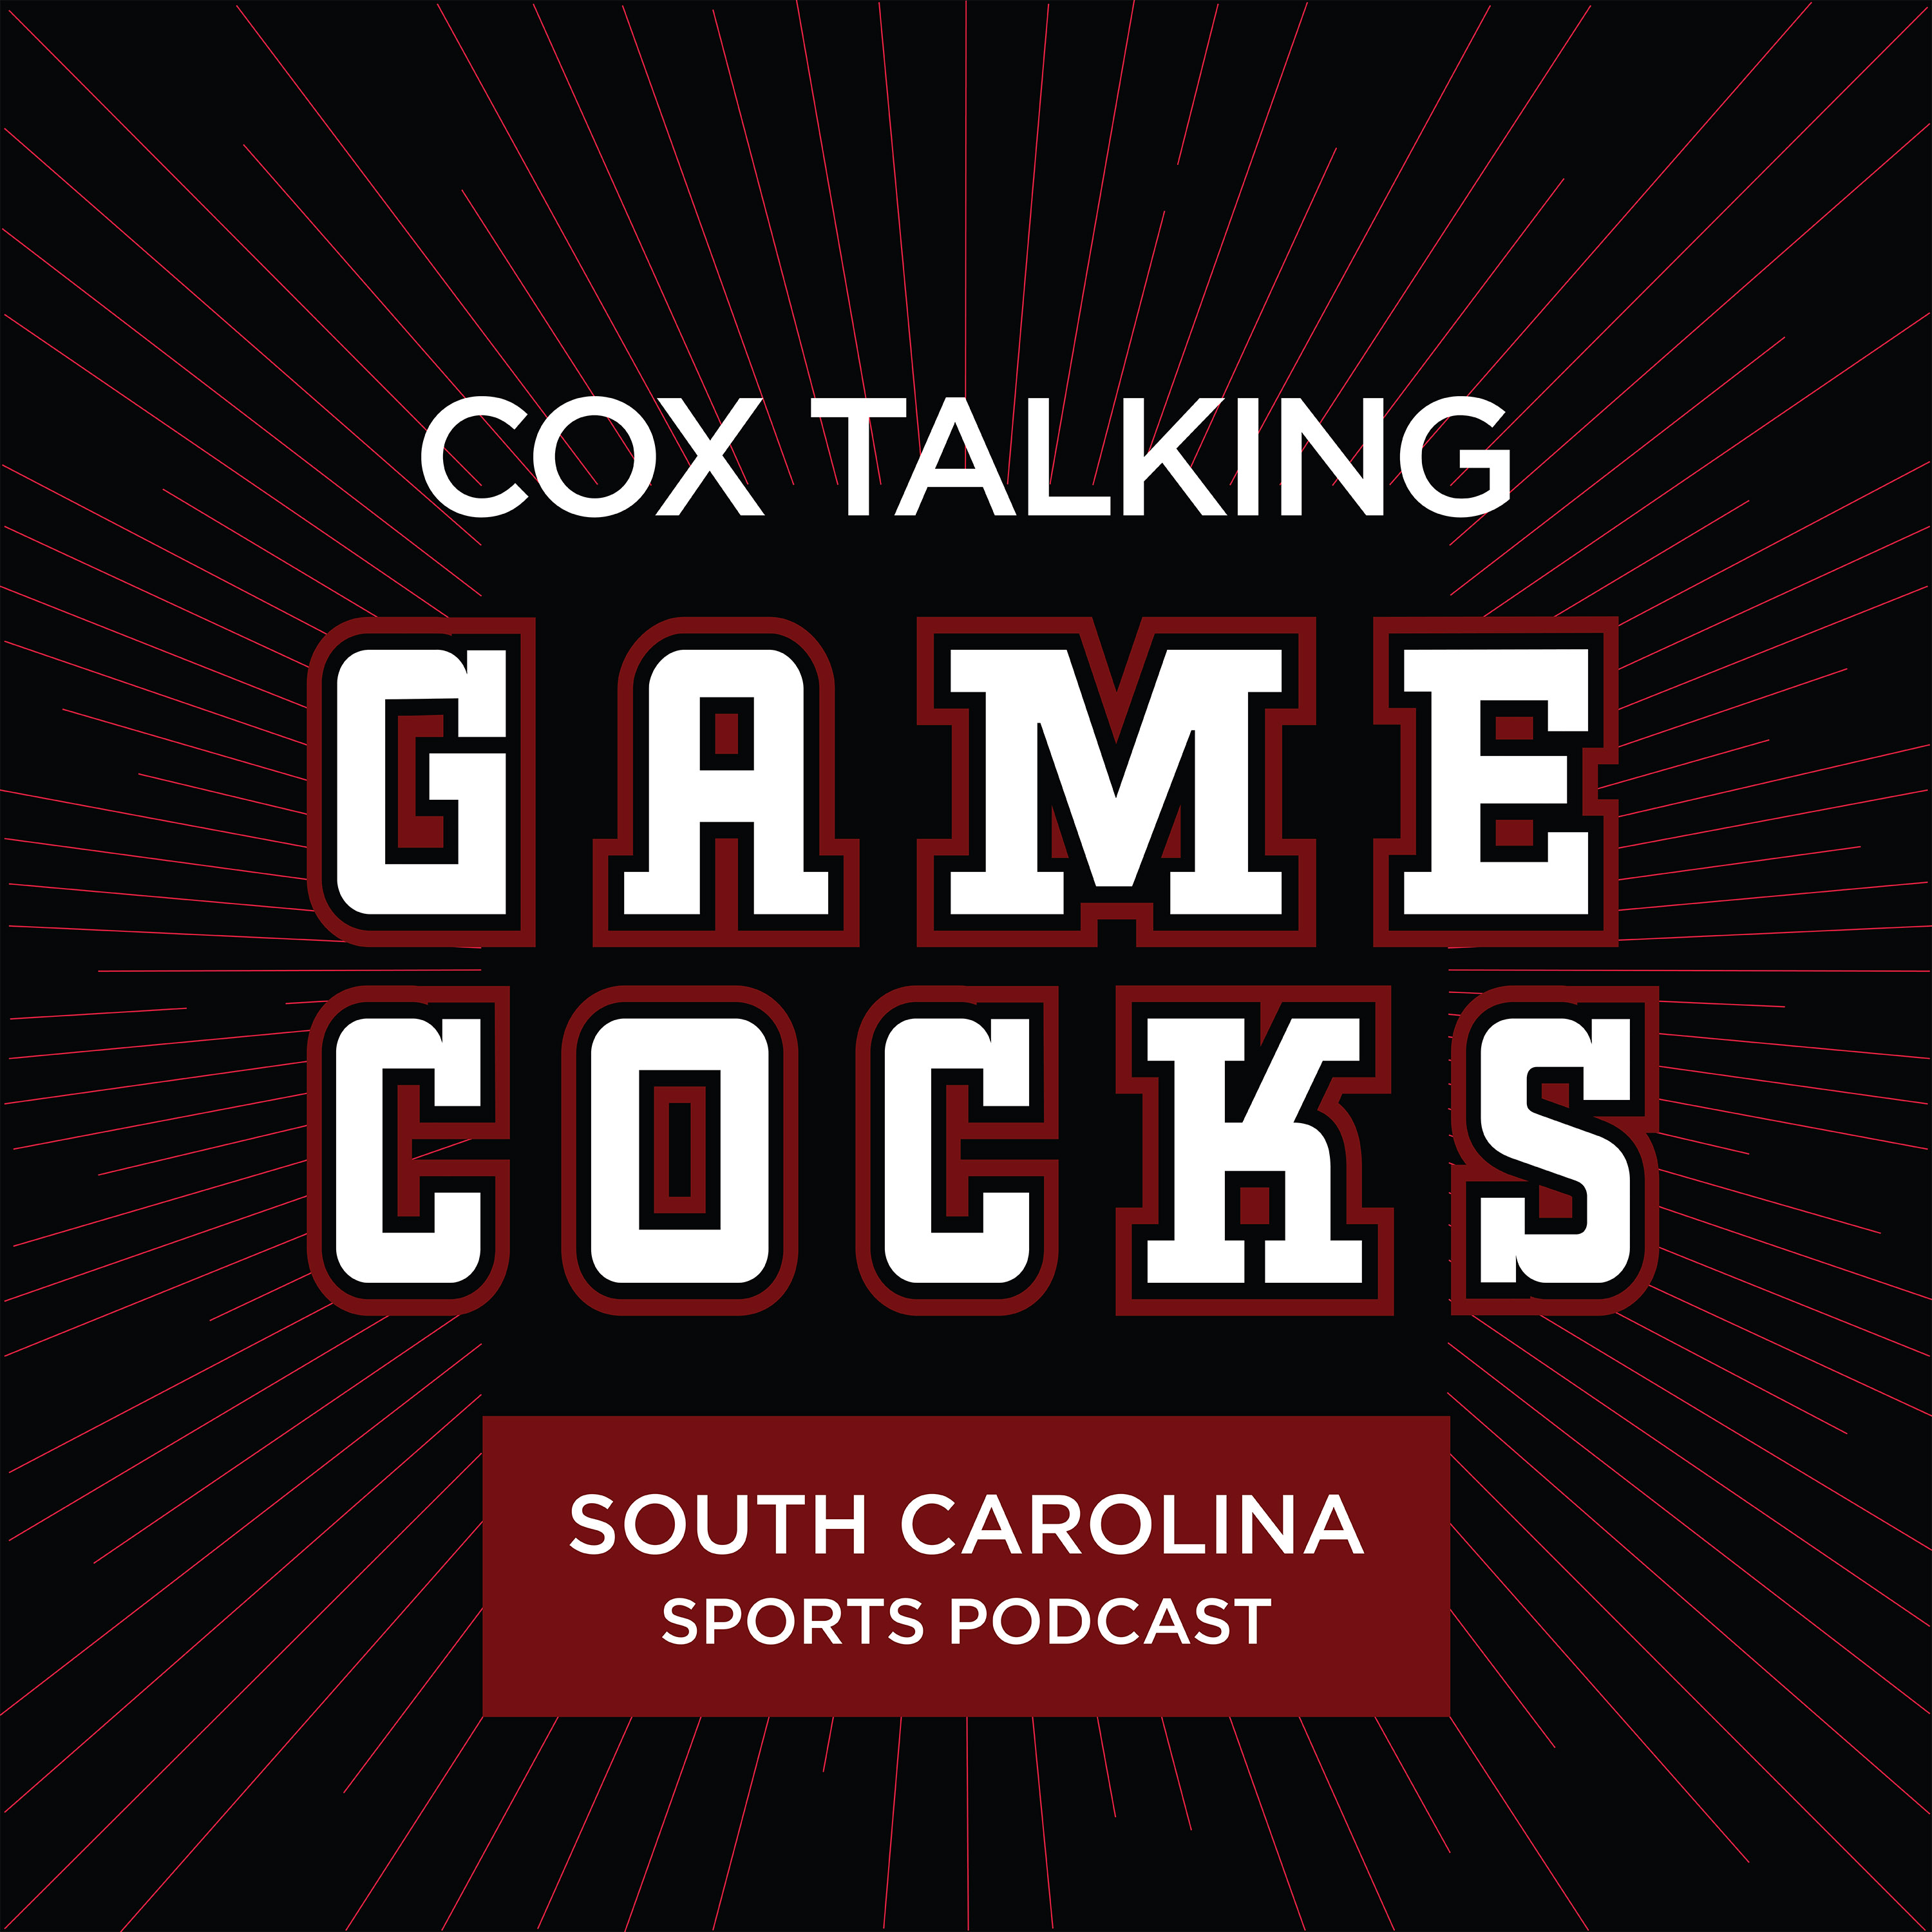 Carolina Football Reaches Critical Matchup Against UK, Game Preview and Analysis + USC Athletics Weekly Recap